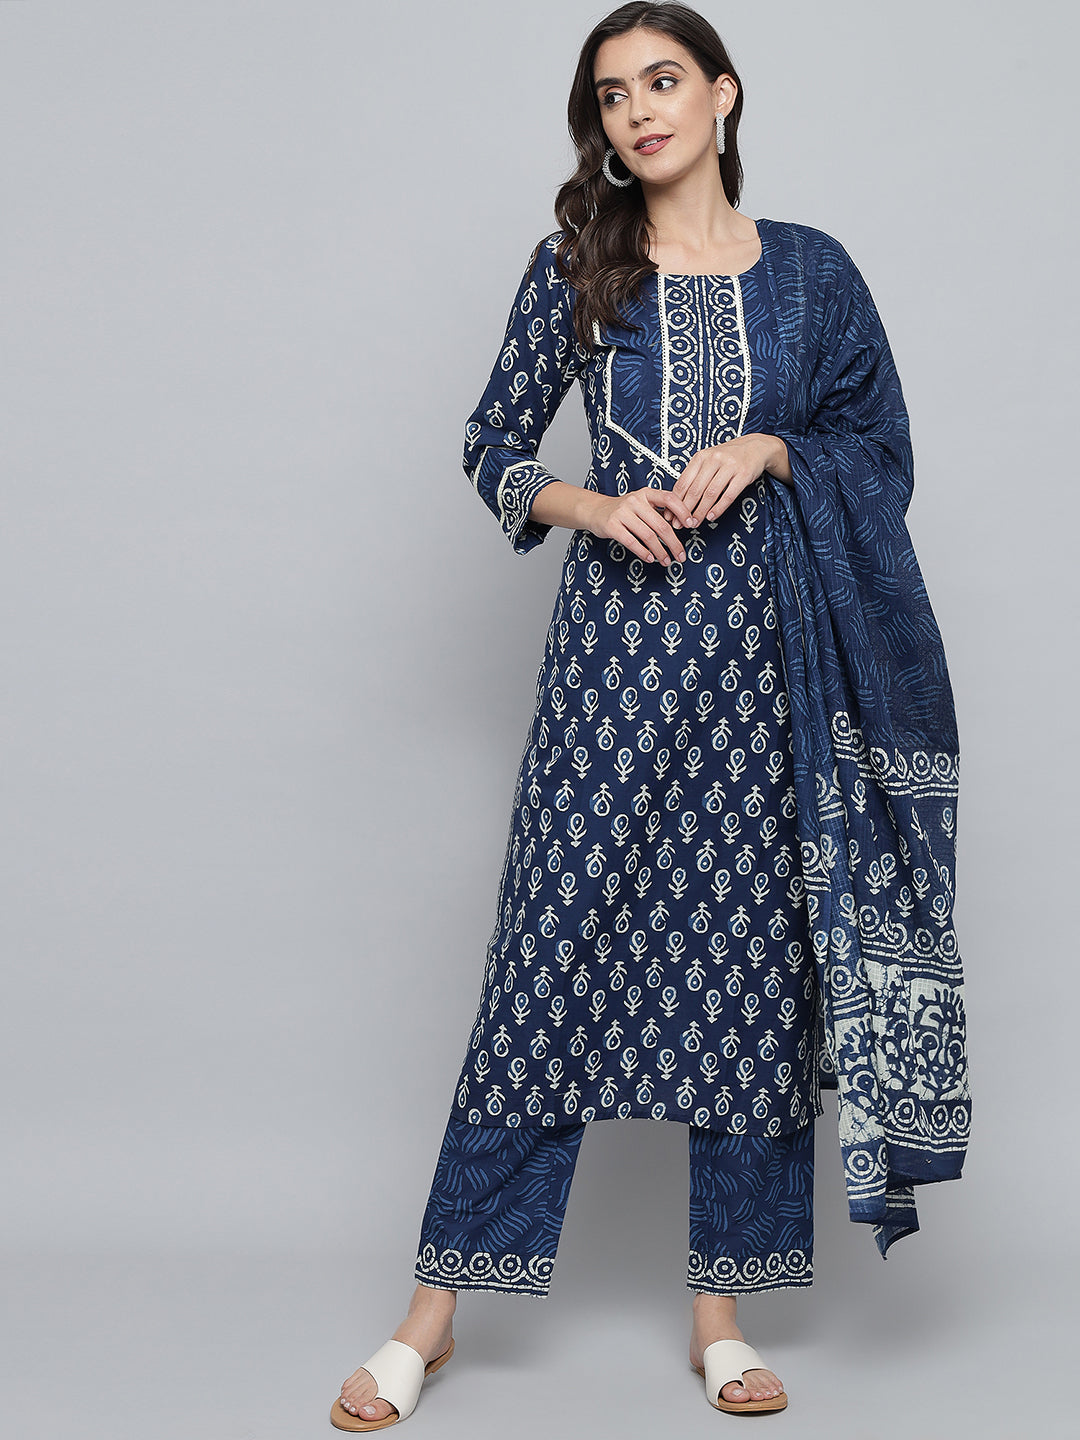 Sale | Buy Sale Online in India - W for Woman